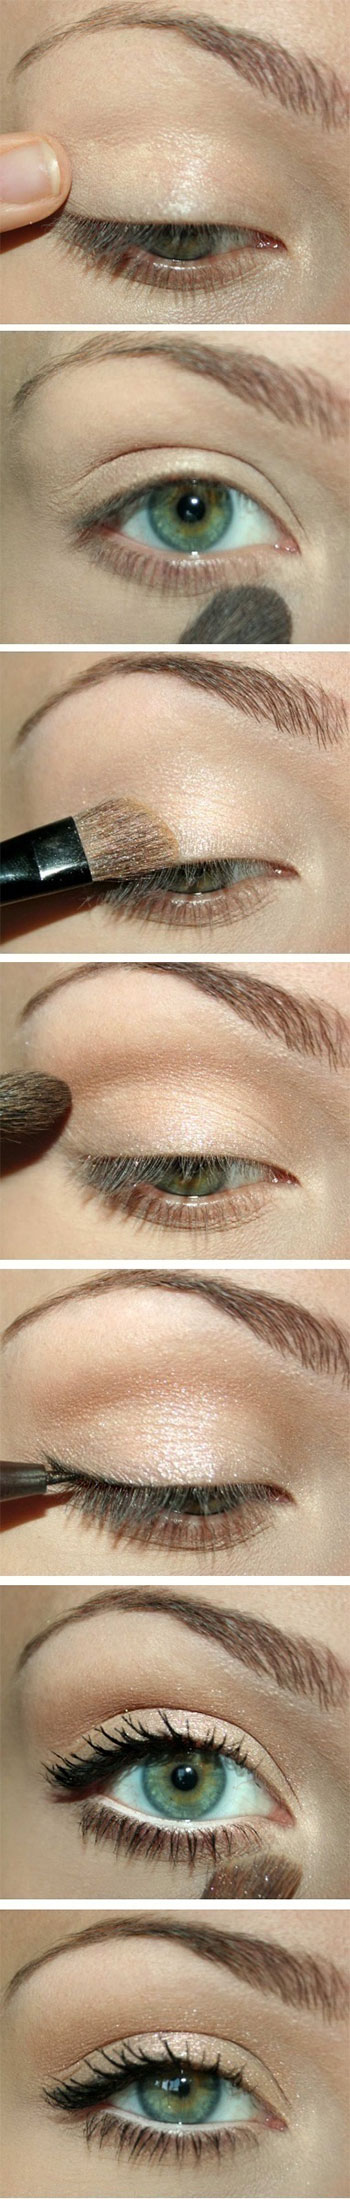 15-Easy-Natural-Make-Up-Tutorials-2014-For-Beginners-Learners-16